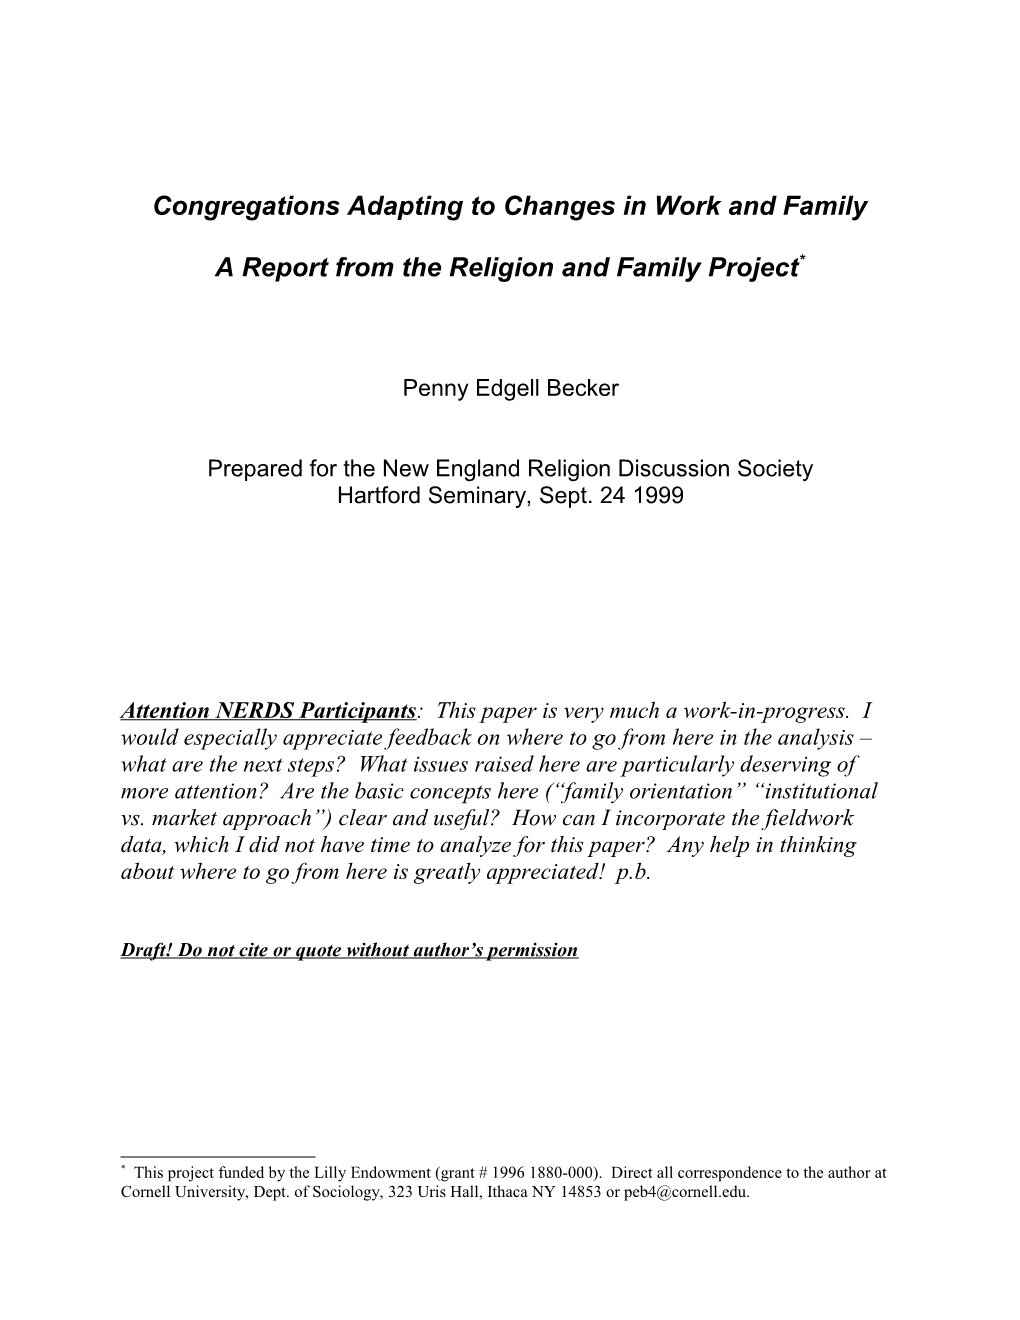 Congregational Responses to Nontraditional Families